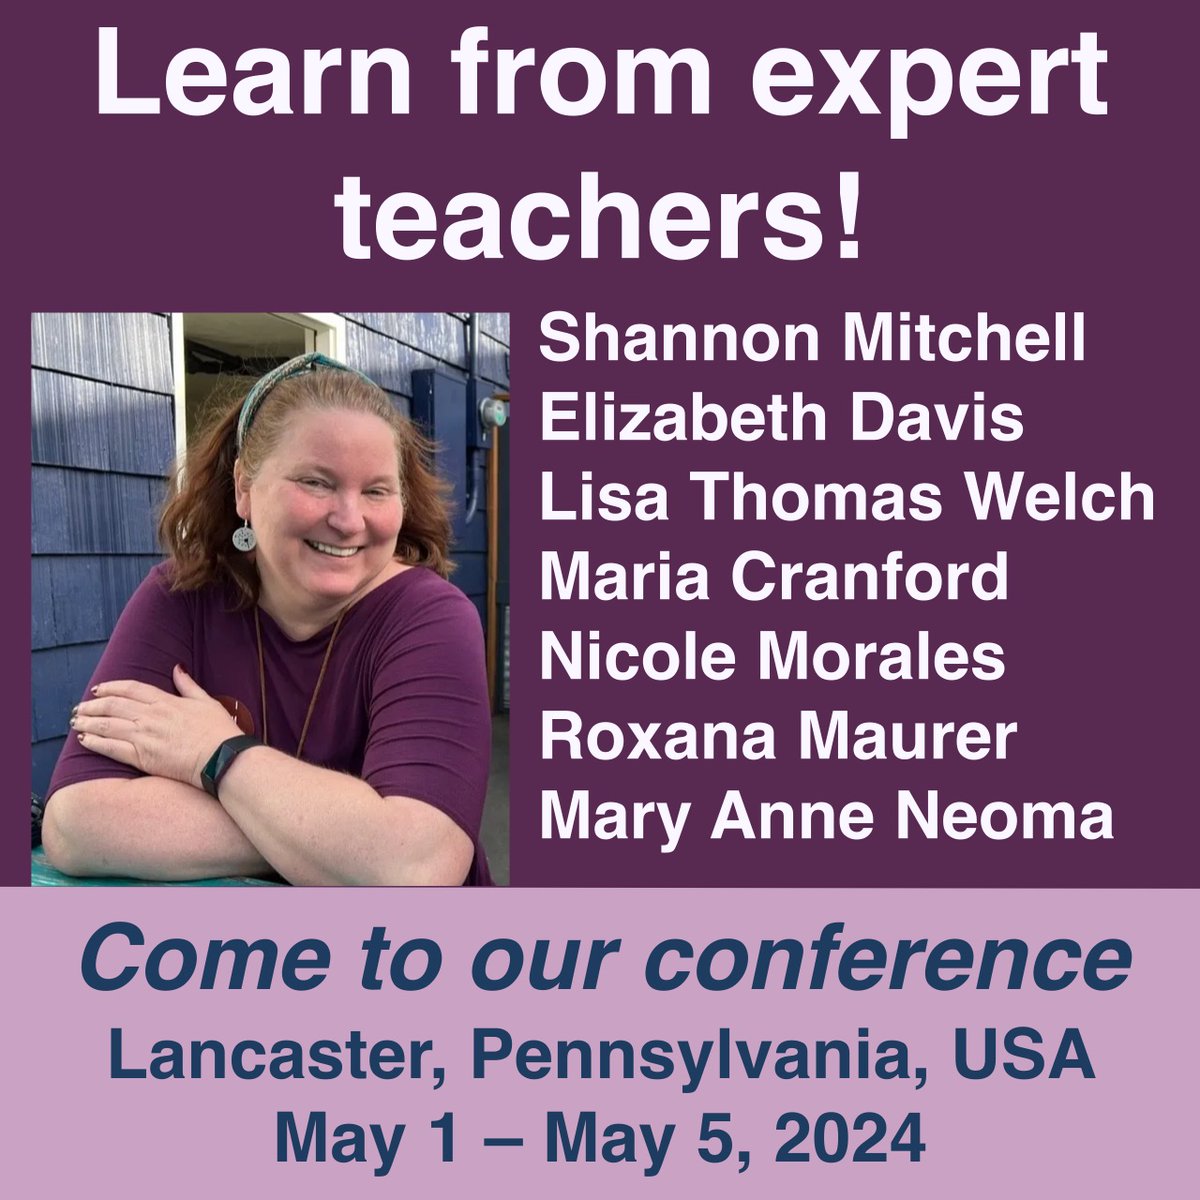 Registration is now open for the Midwifery Today conference in Lancaster Pennsylvania this May midwiferytoday.com/conference/lan…